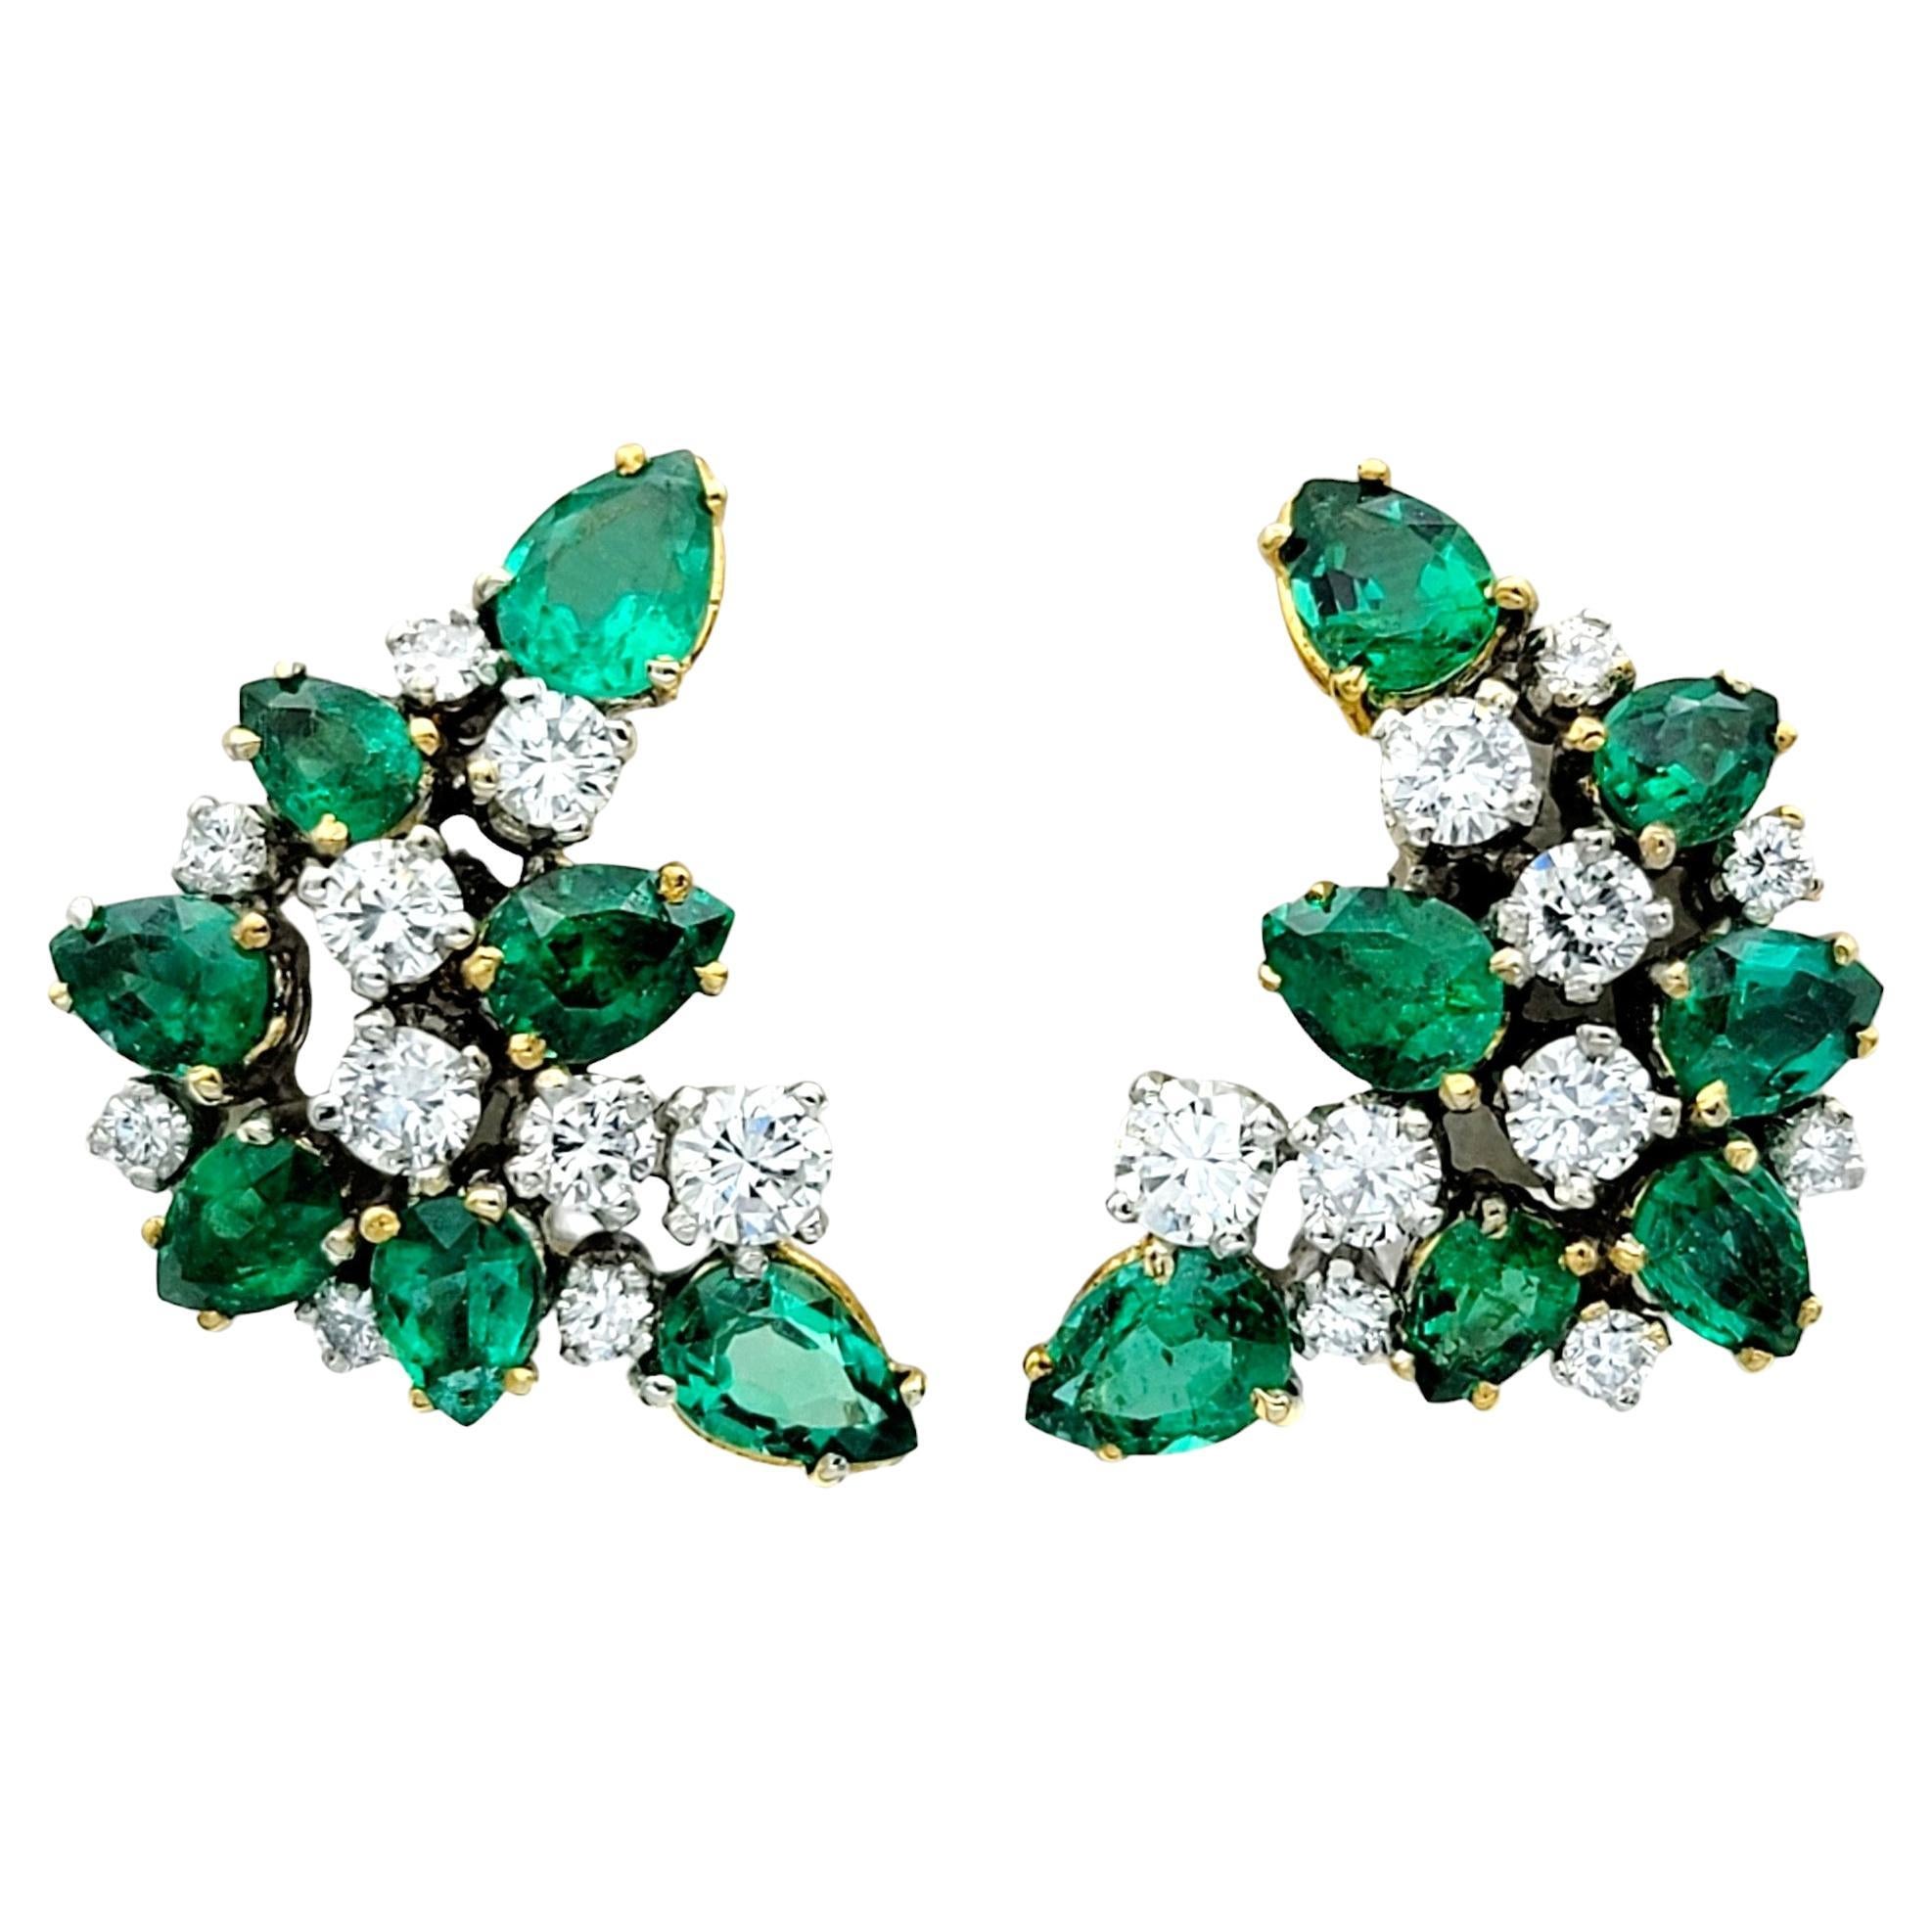 These gorgeous emerald and diamond cluster earrings are crafted in radiant 18 karat yellow gold. Each earring features a captivating cluster of vivid green pear cut emeralds paired with dazzling round diamonds, creating a mesmerizing display of